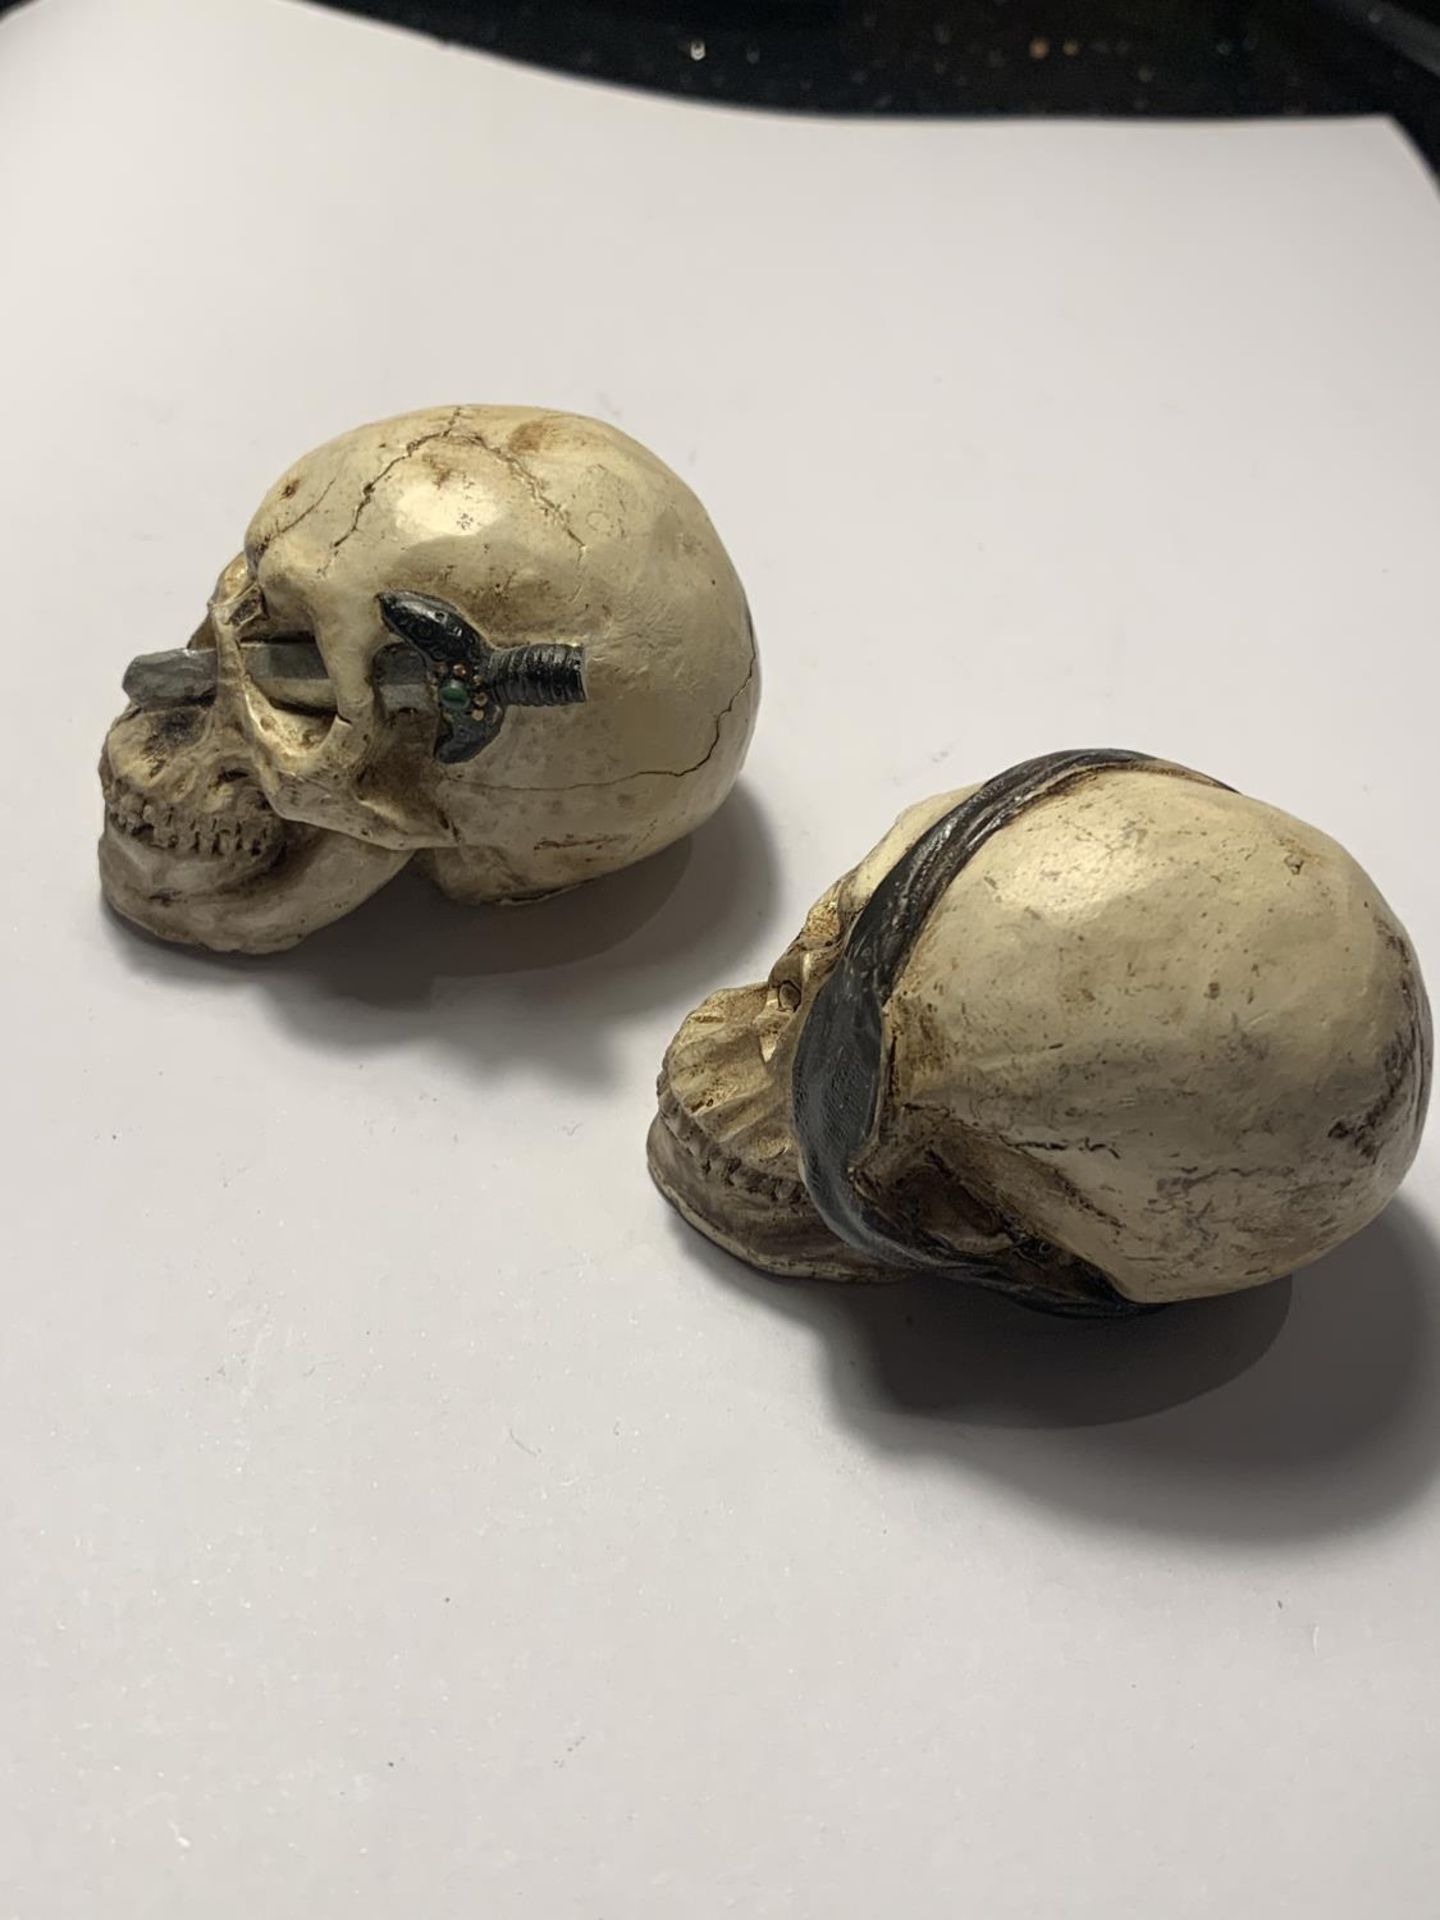 TWO PIRATE SKULLS - Image 4 of 4